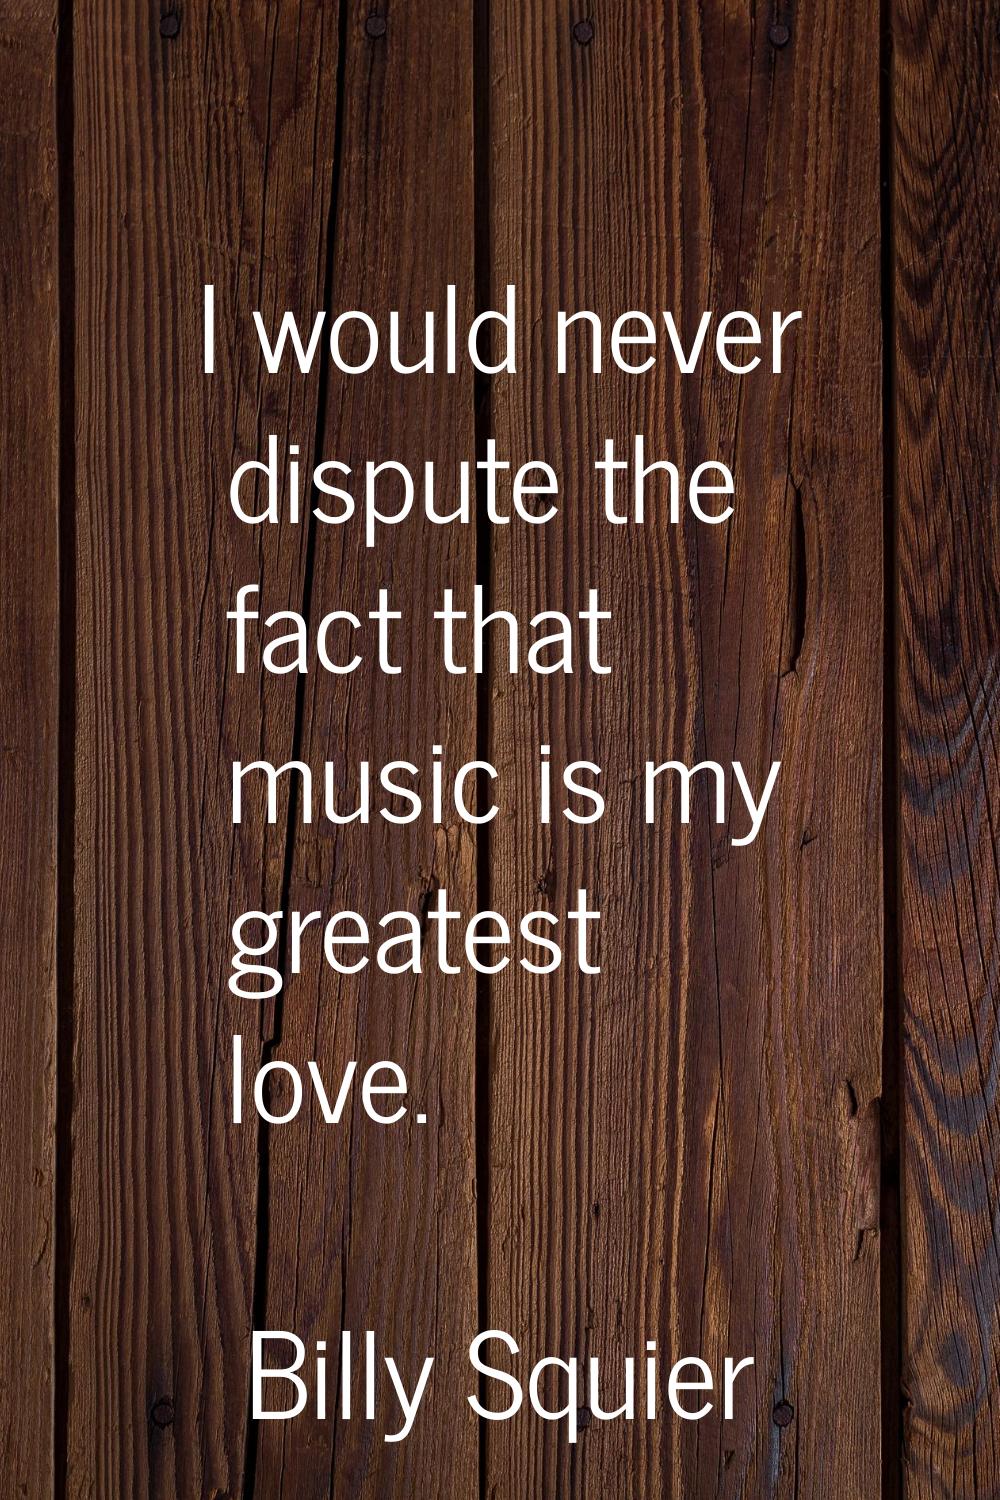 I would never dispute the fact that music is my greatest love.